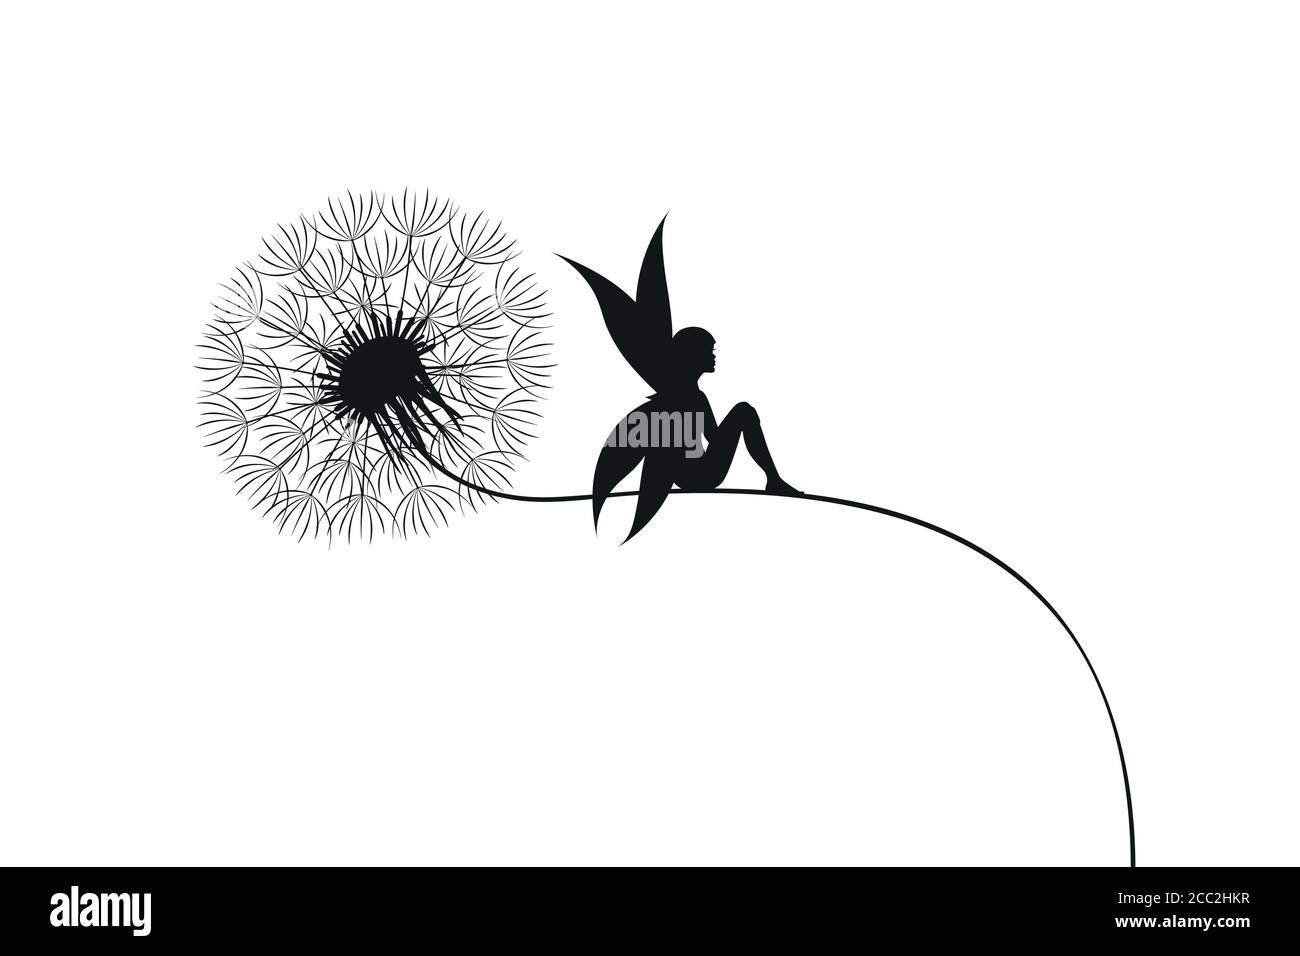 fairy sits on a dandelion silhouette vector illustration EPS10 Stock Vector